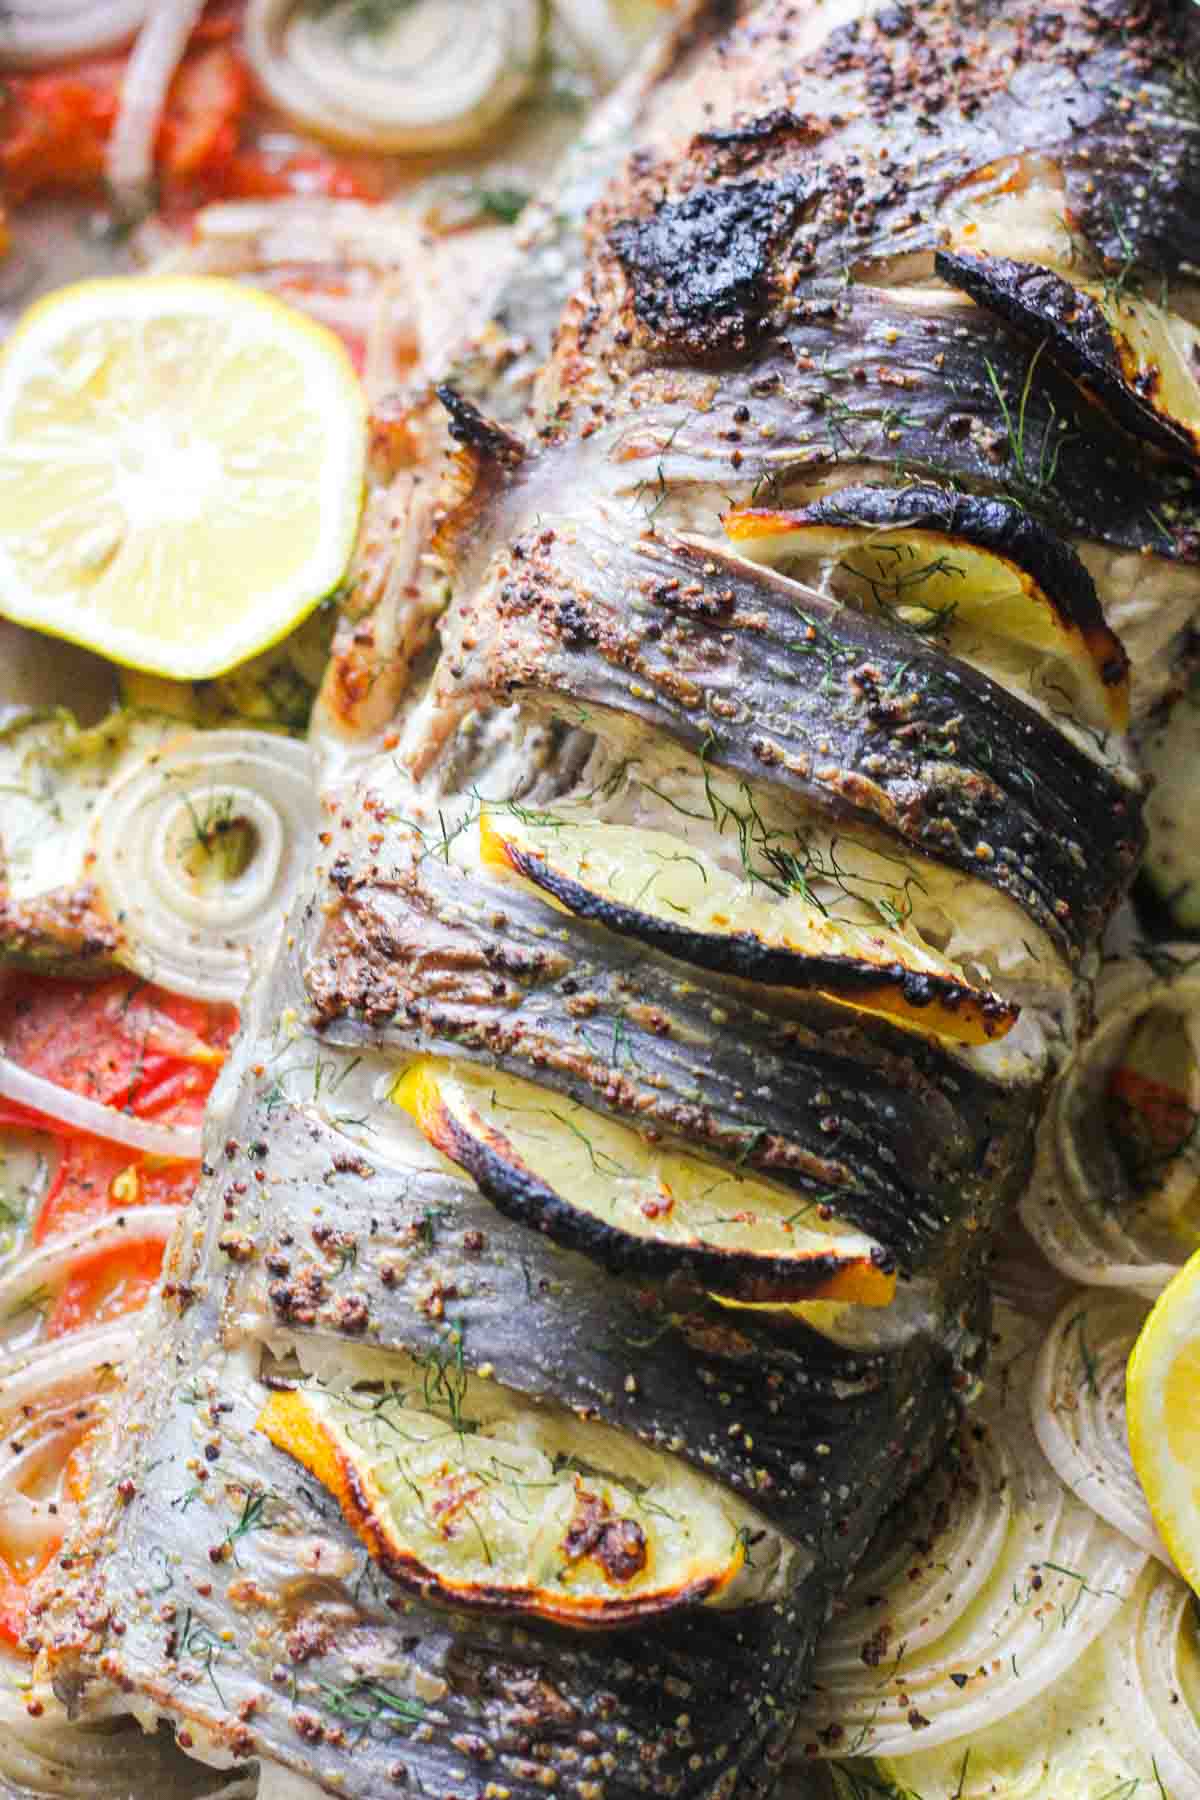 Whole catfish baked in foil in the oven - The Top Meal